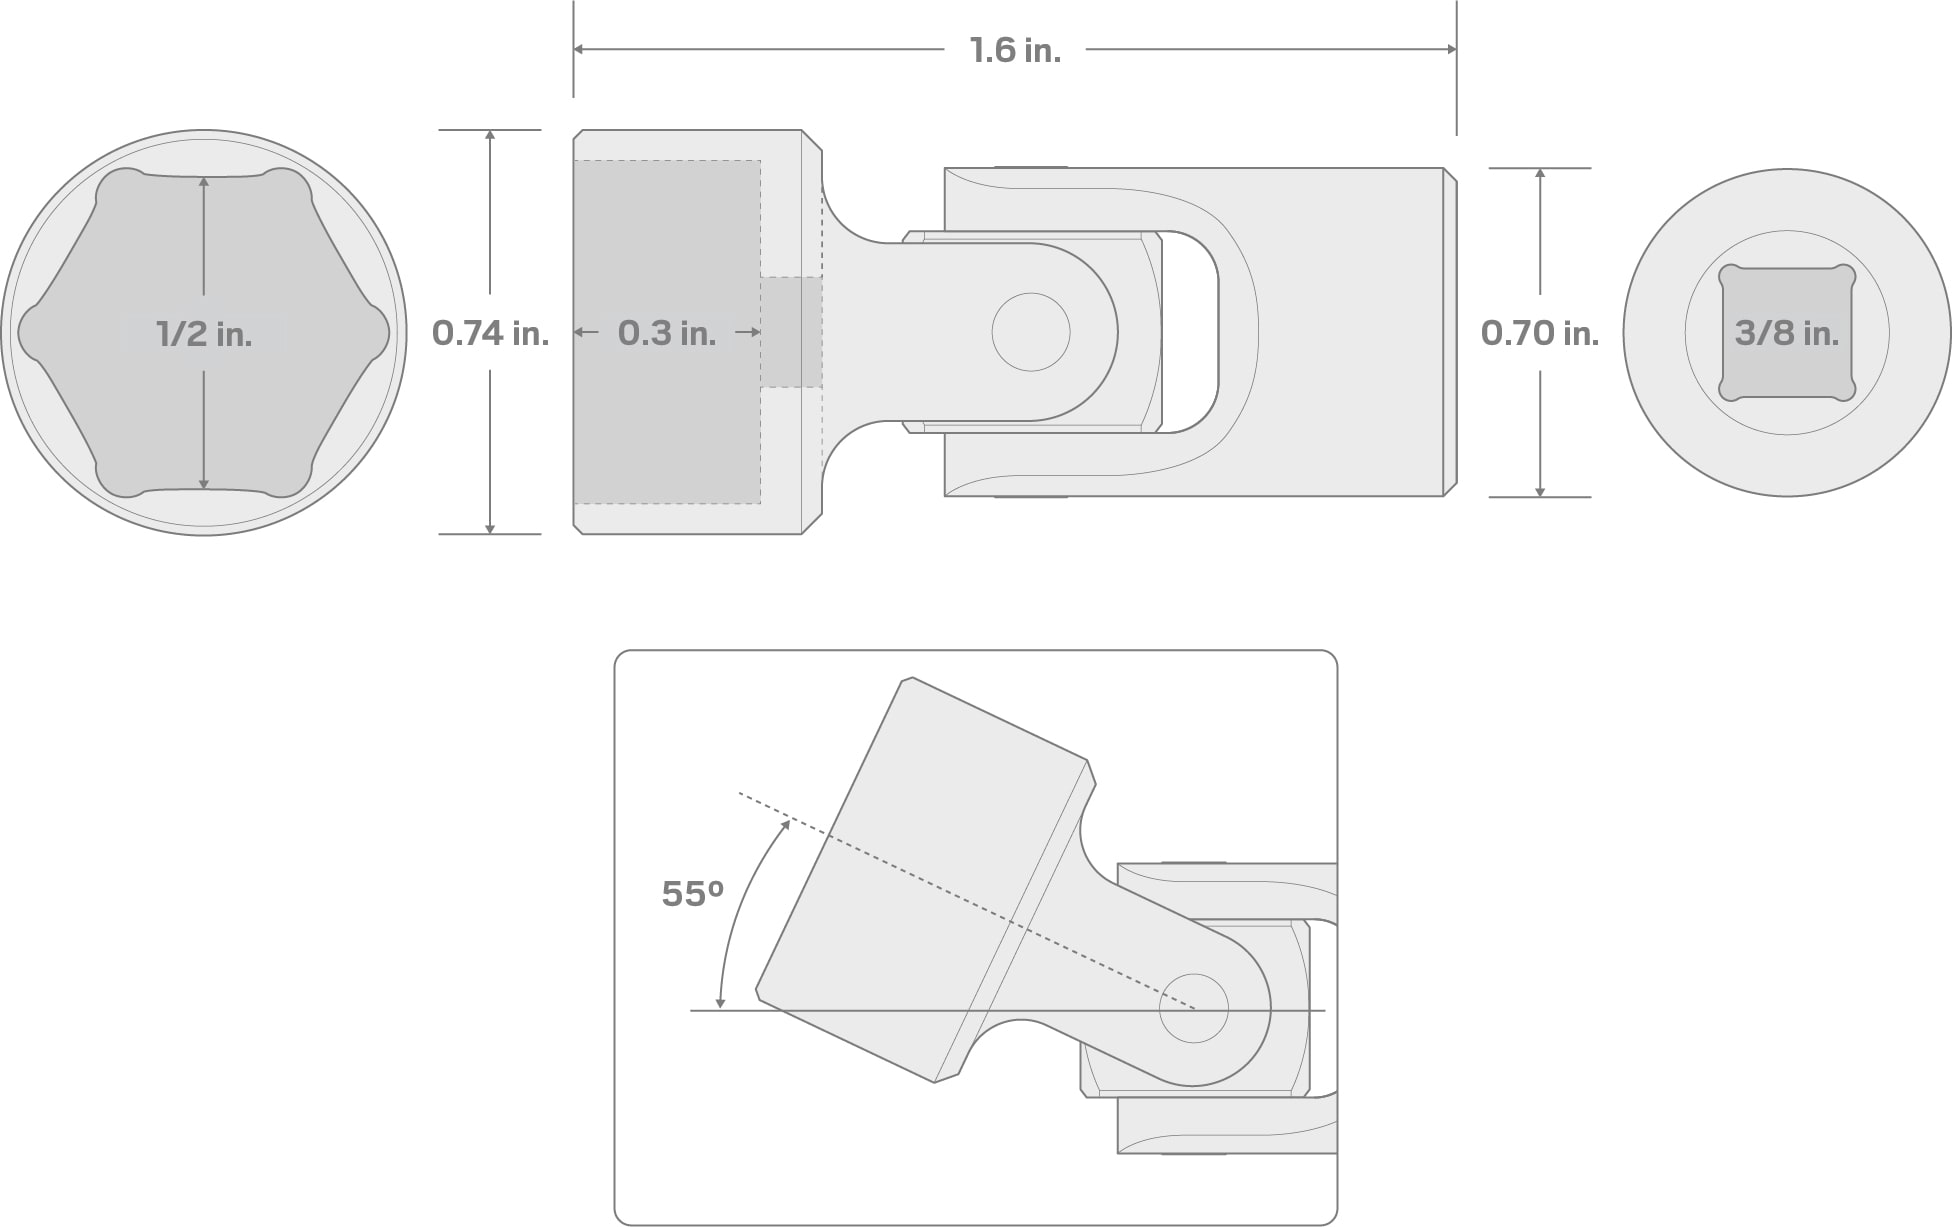 Specs for 3/8 Inch Drive x 1/2 Inch Universal Joint Socket